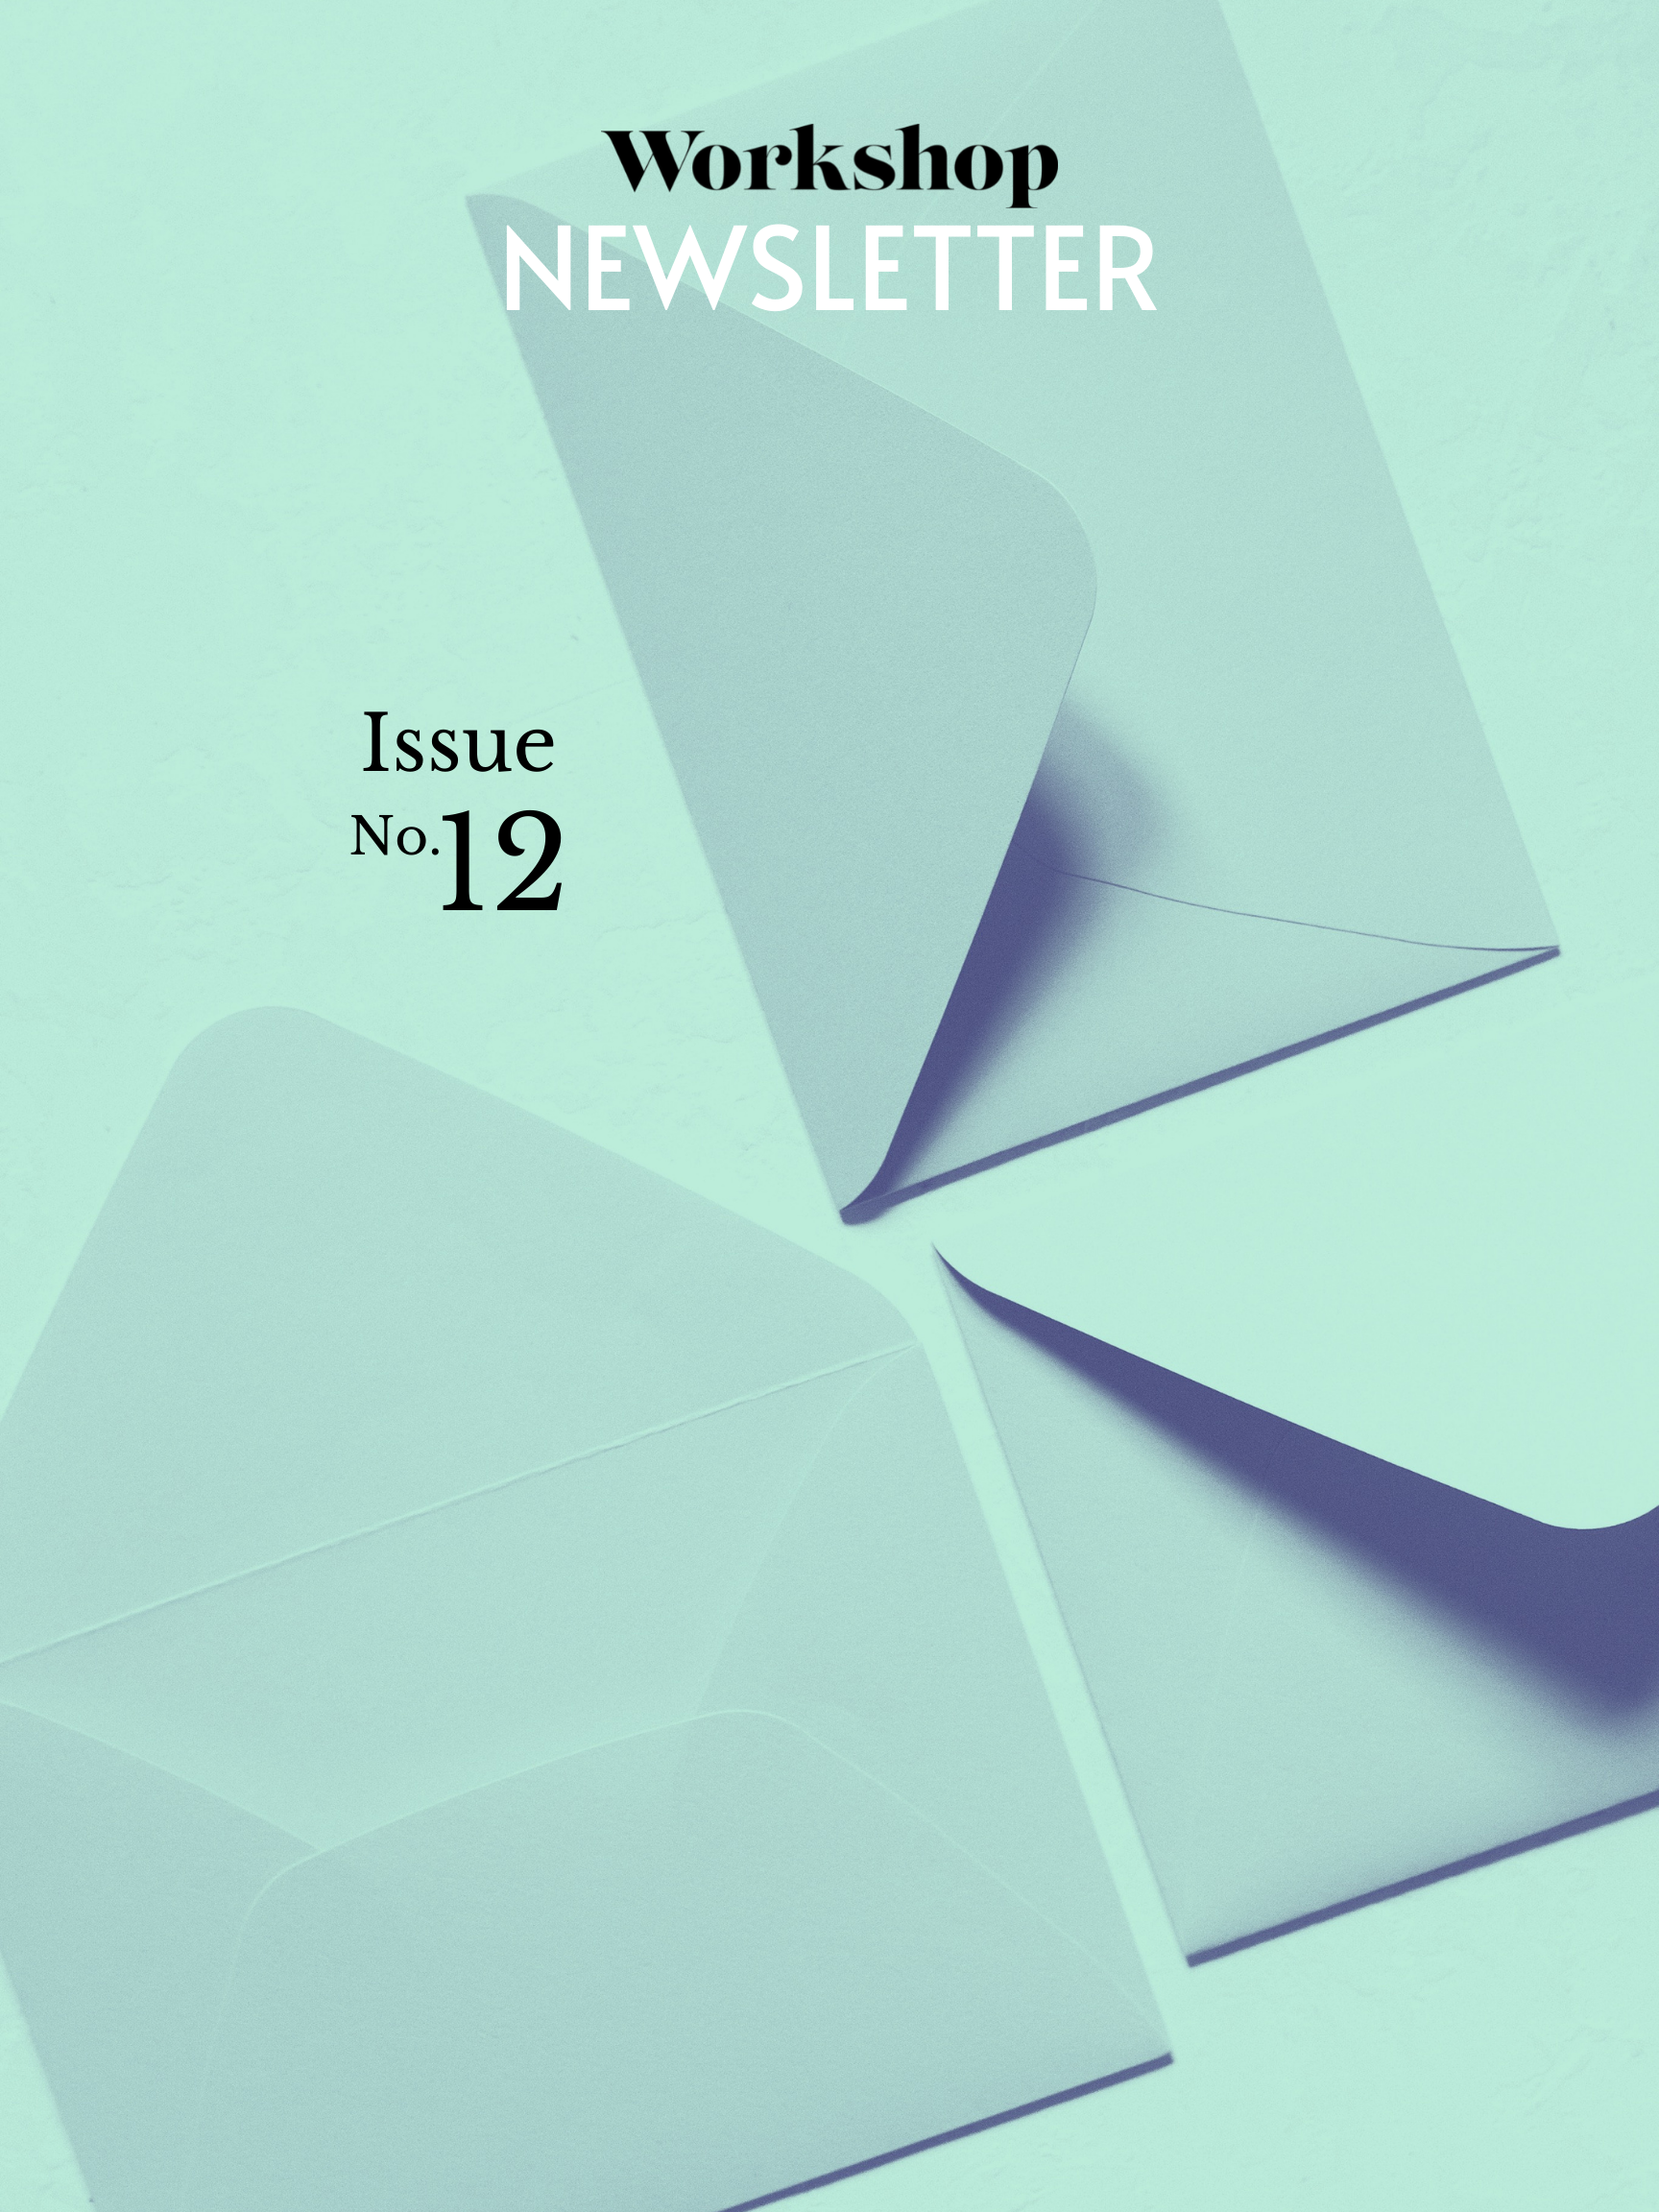 Envelopes overlaid in green with the words "Workshop Newsletter Issue No. 12"